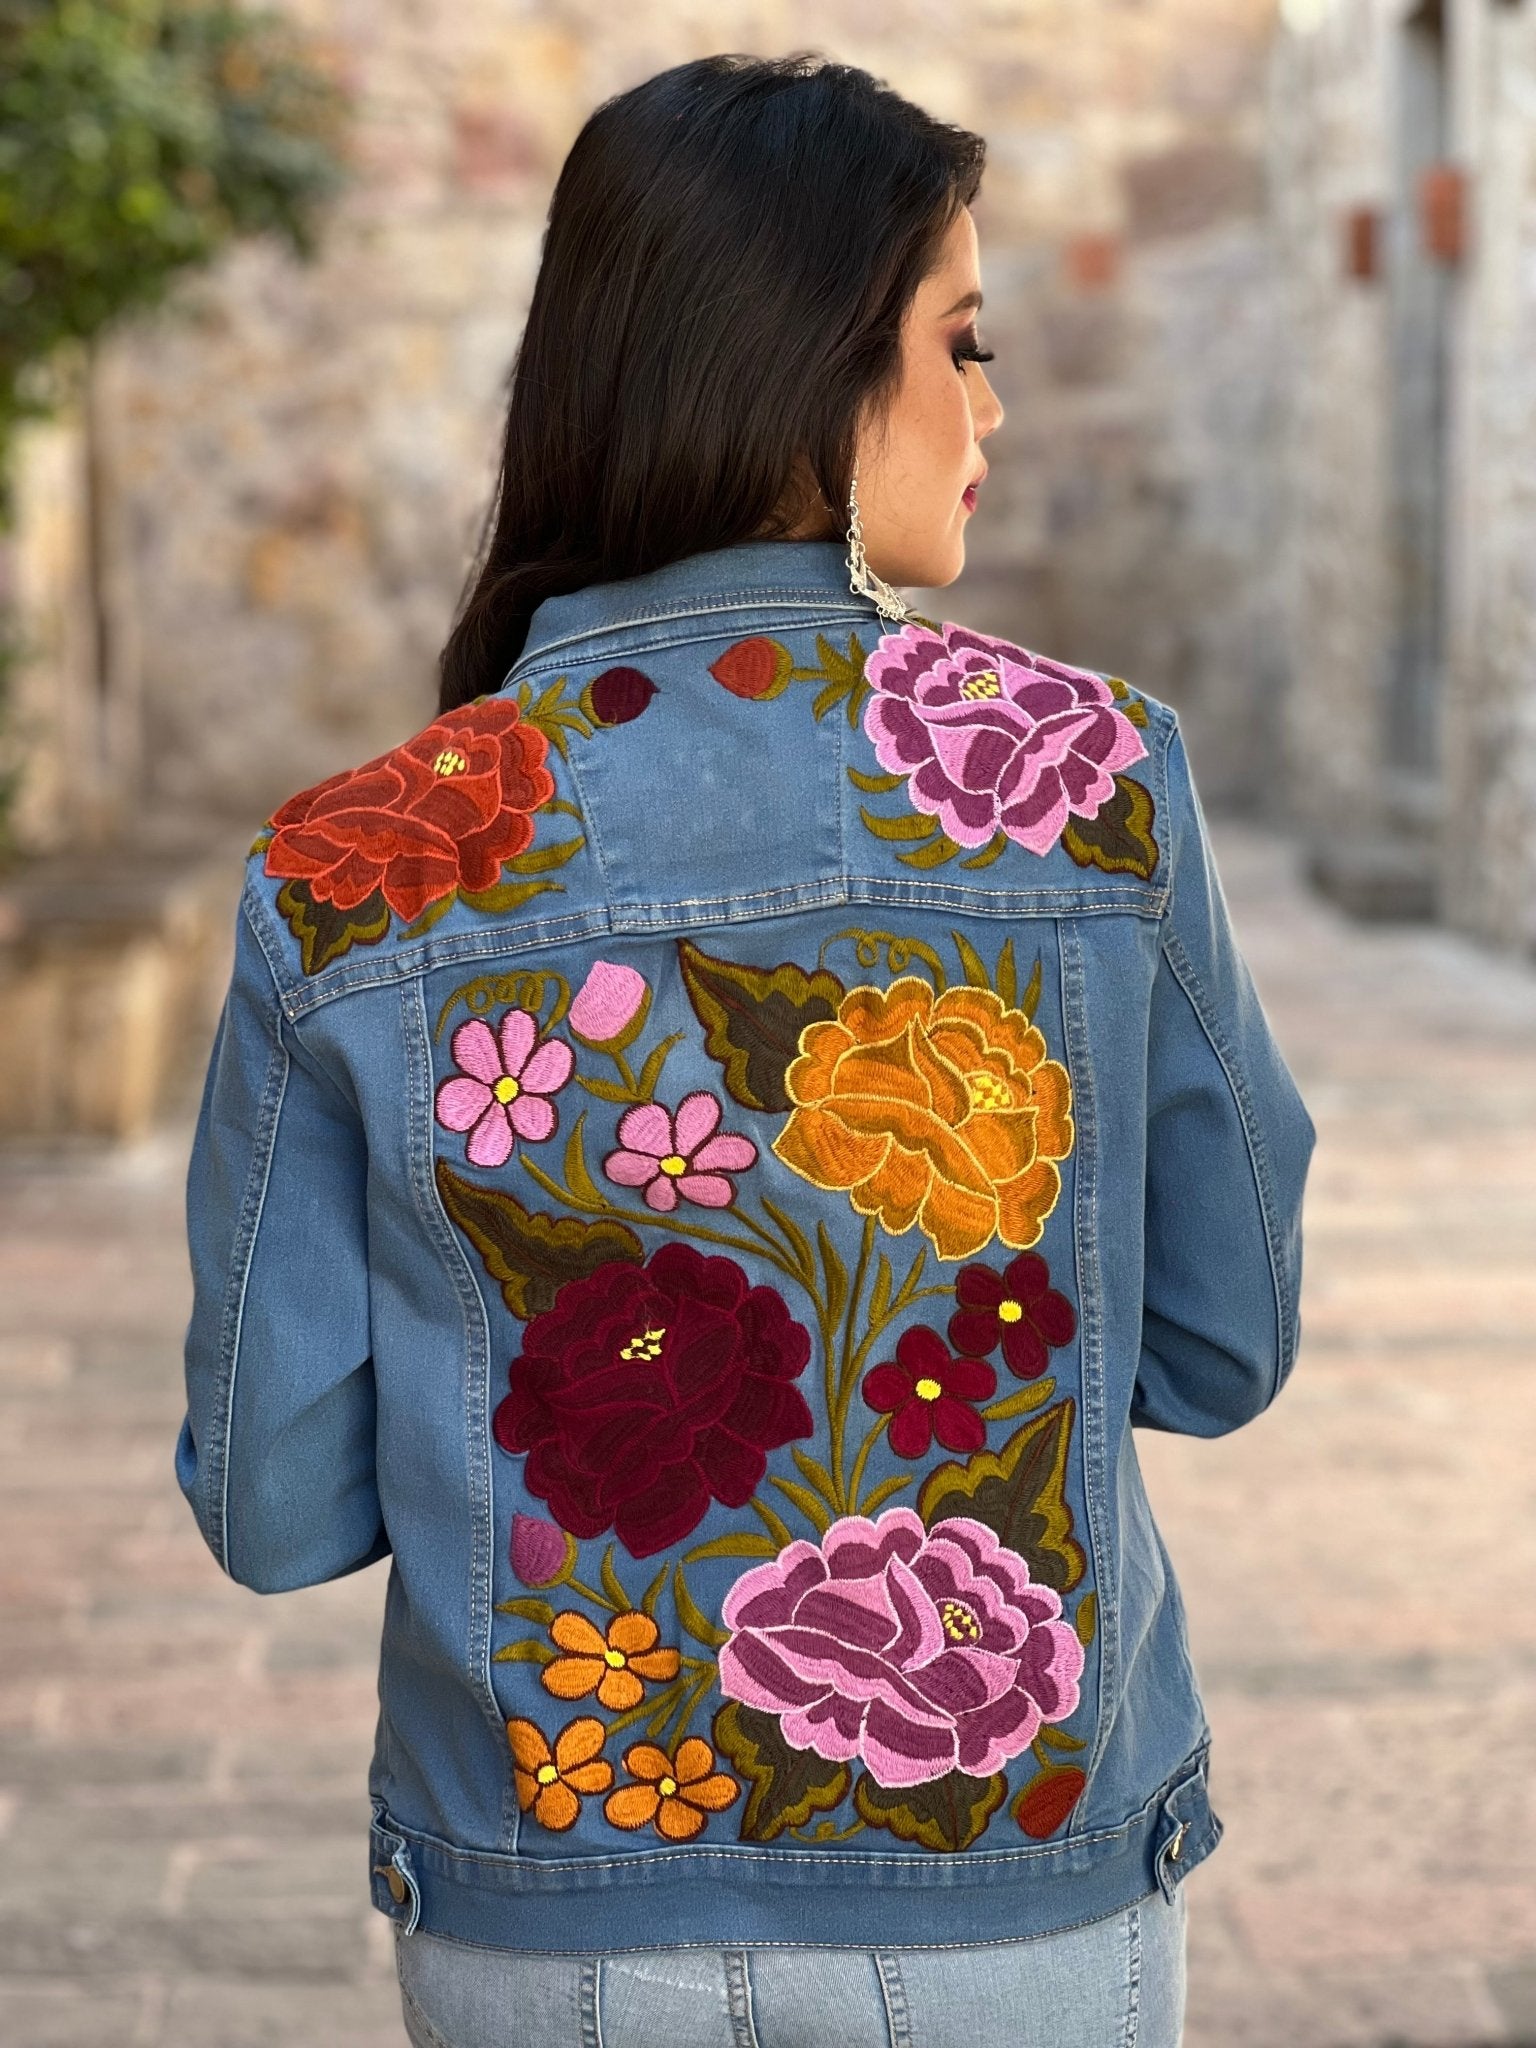 Mexican Embroidered Jeans Jacket. Zinacatan Jeans Jacket - Solei Store